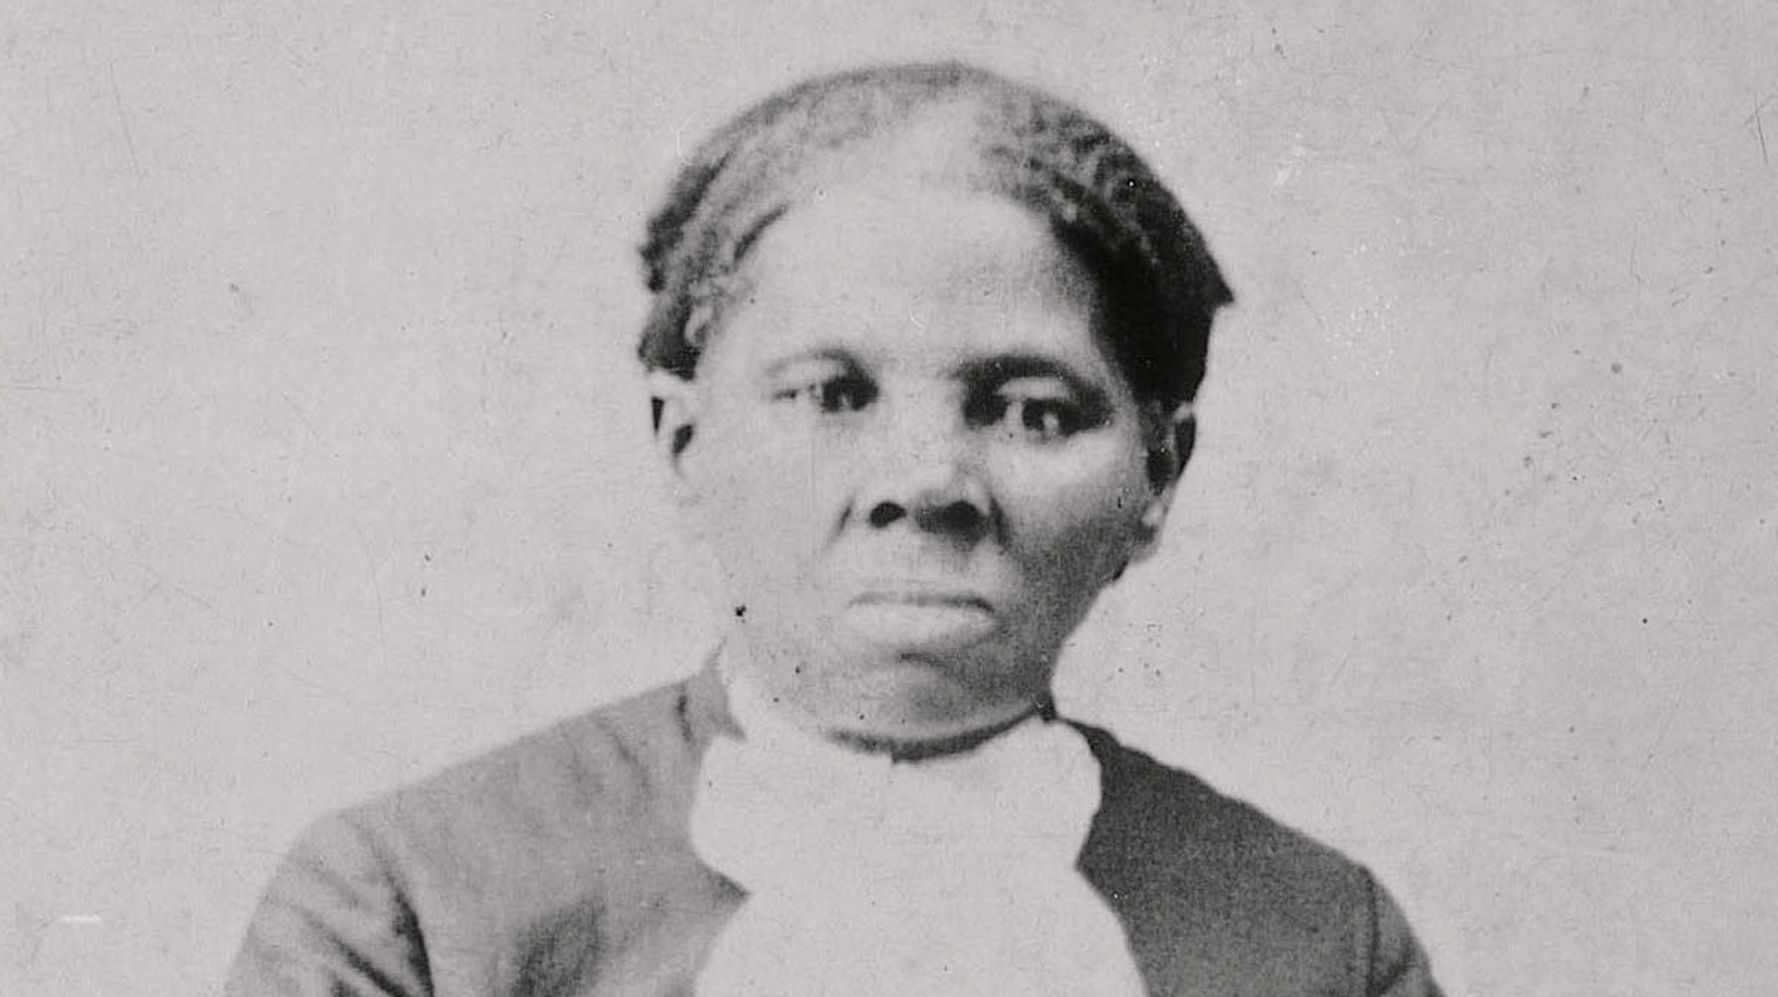 Harriet Tubman's Family Home Unearthed In Maryland Wildlife Refuge